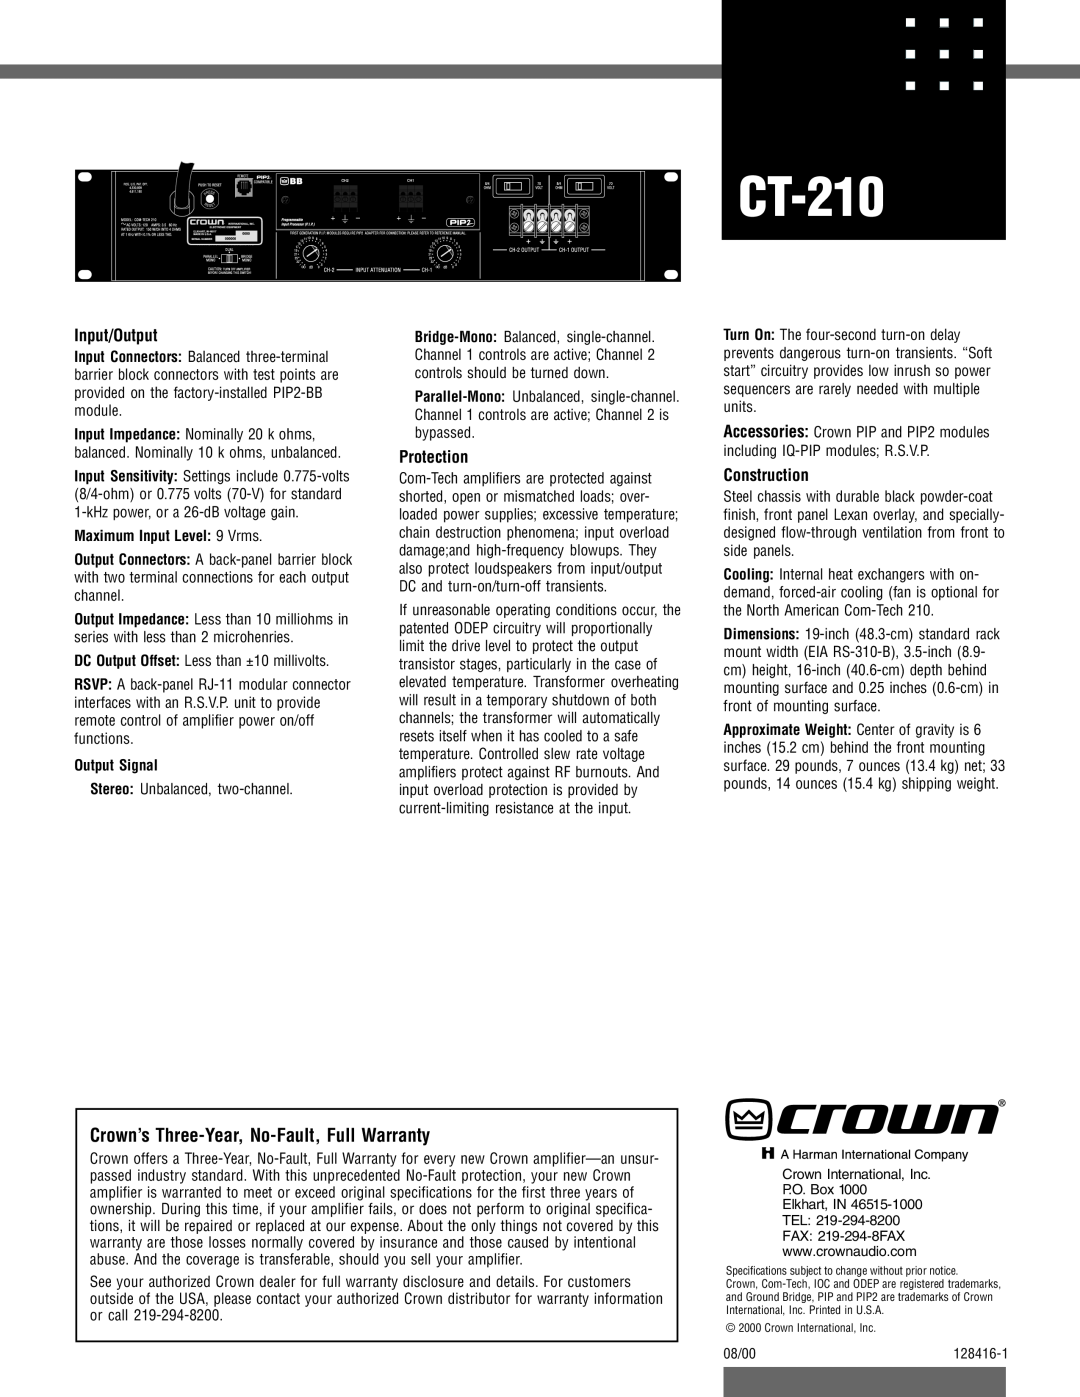 Crown Audio CT-210 specifications Crown’s Three-Year, No-Fault,Full Warranty, Input/Output, Protection, Construction 